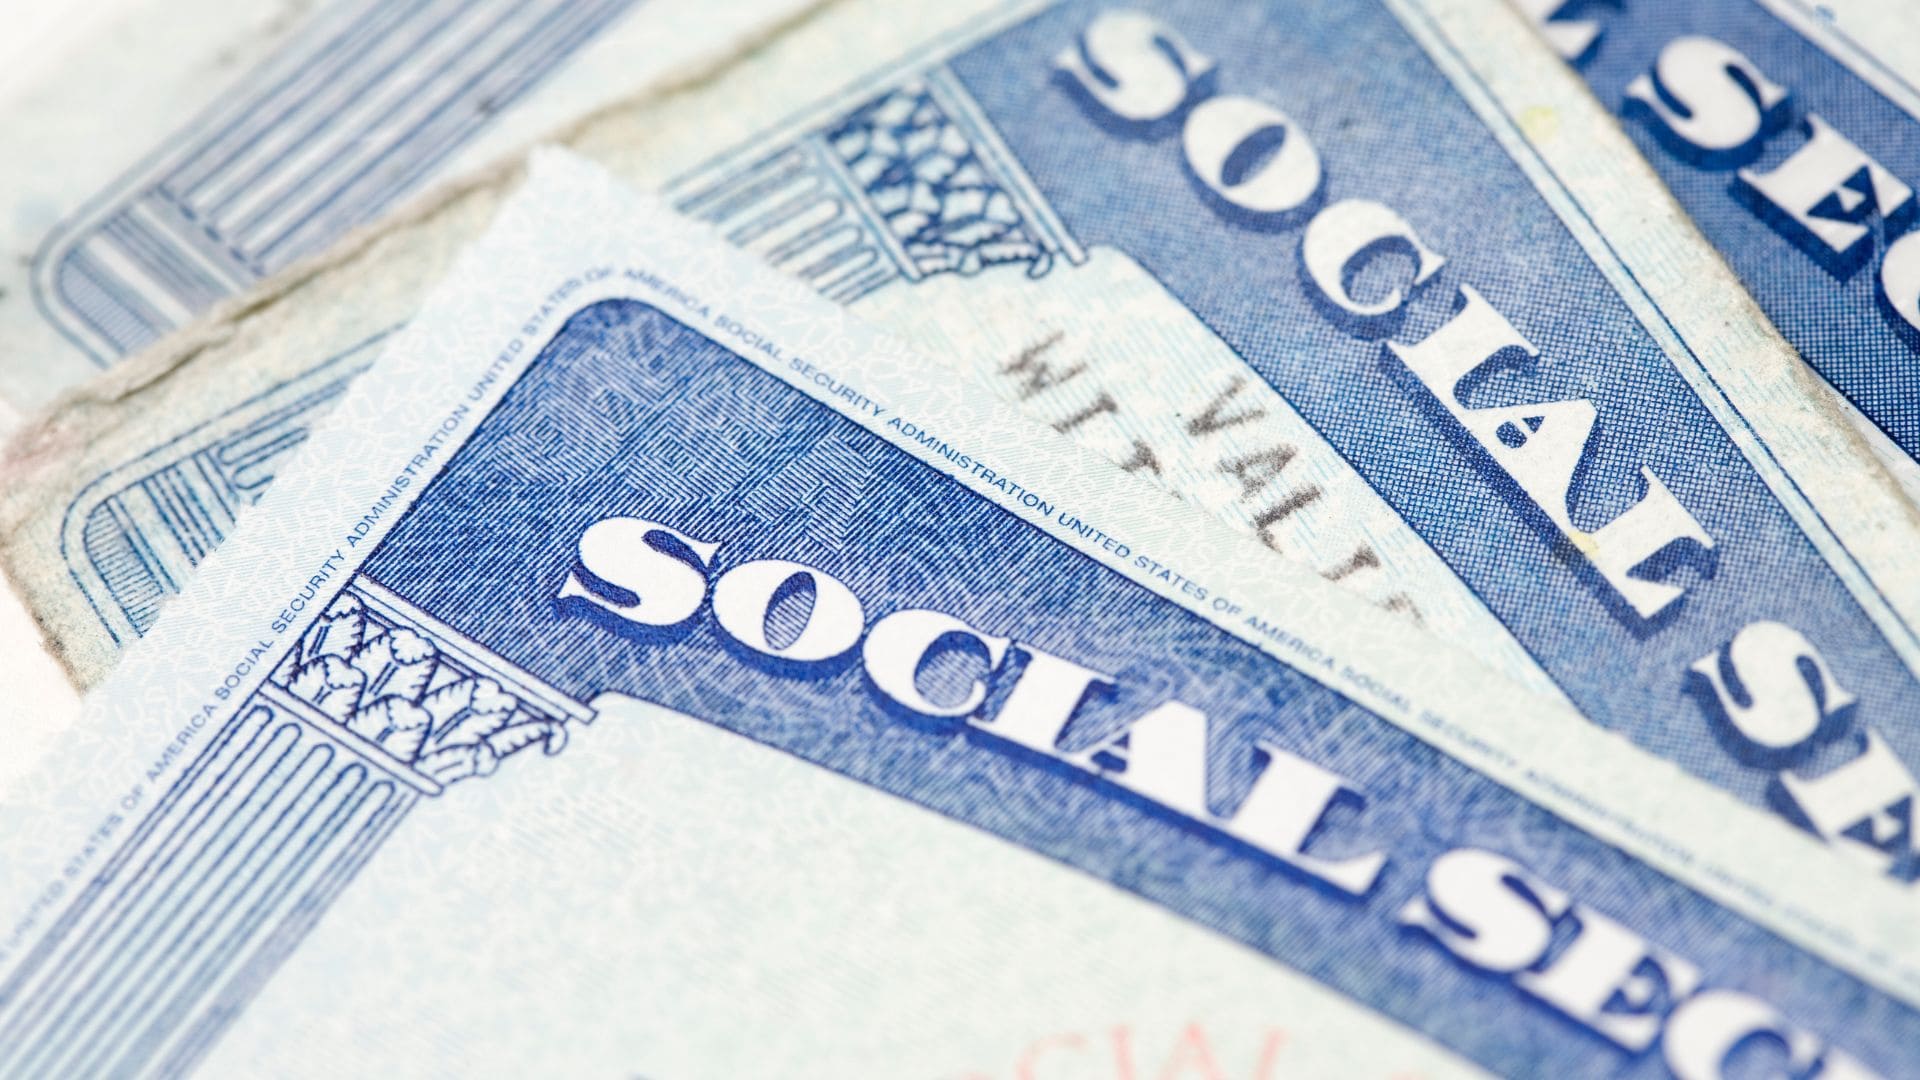 This new Social Security check will arrive in days